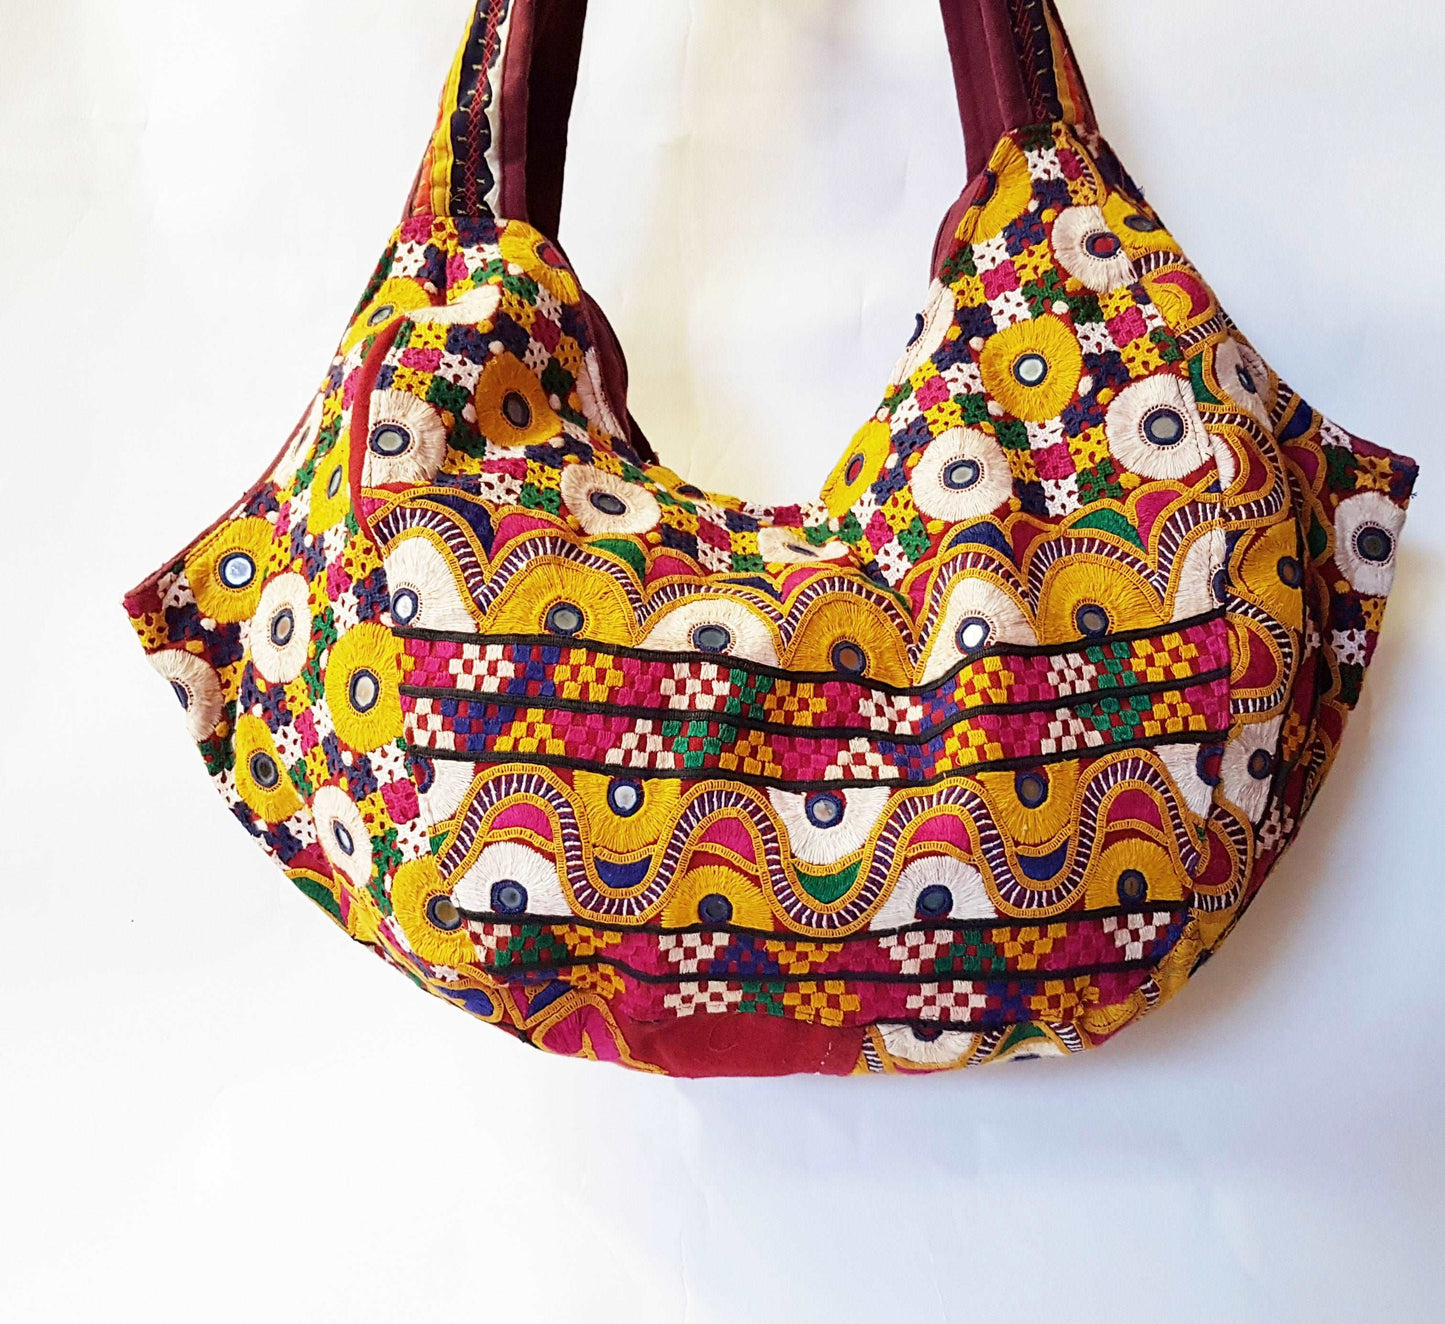 Banjara shoulder bag. Authentic vintage tribal gypsy tote with cowrie shell decoration & embroidered mirror work. One of a kind. Rare find.